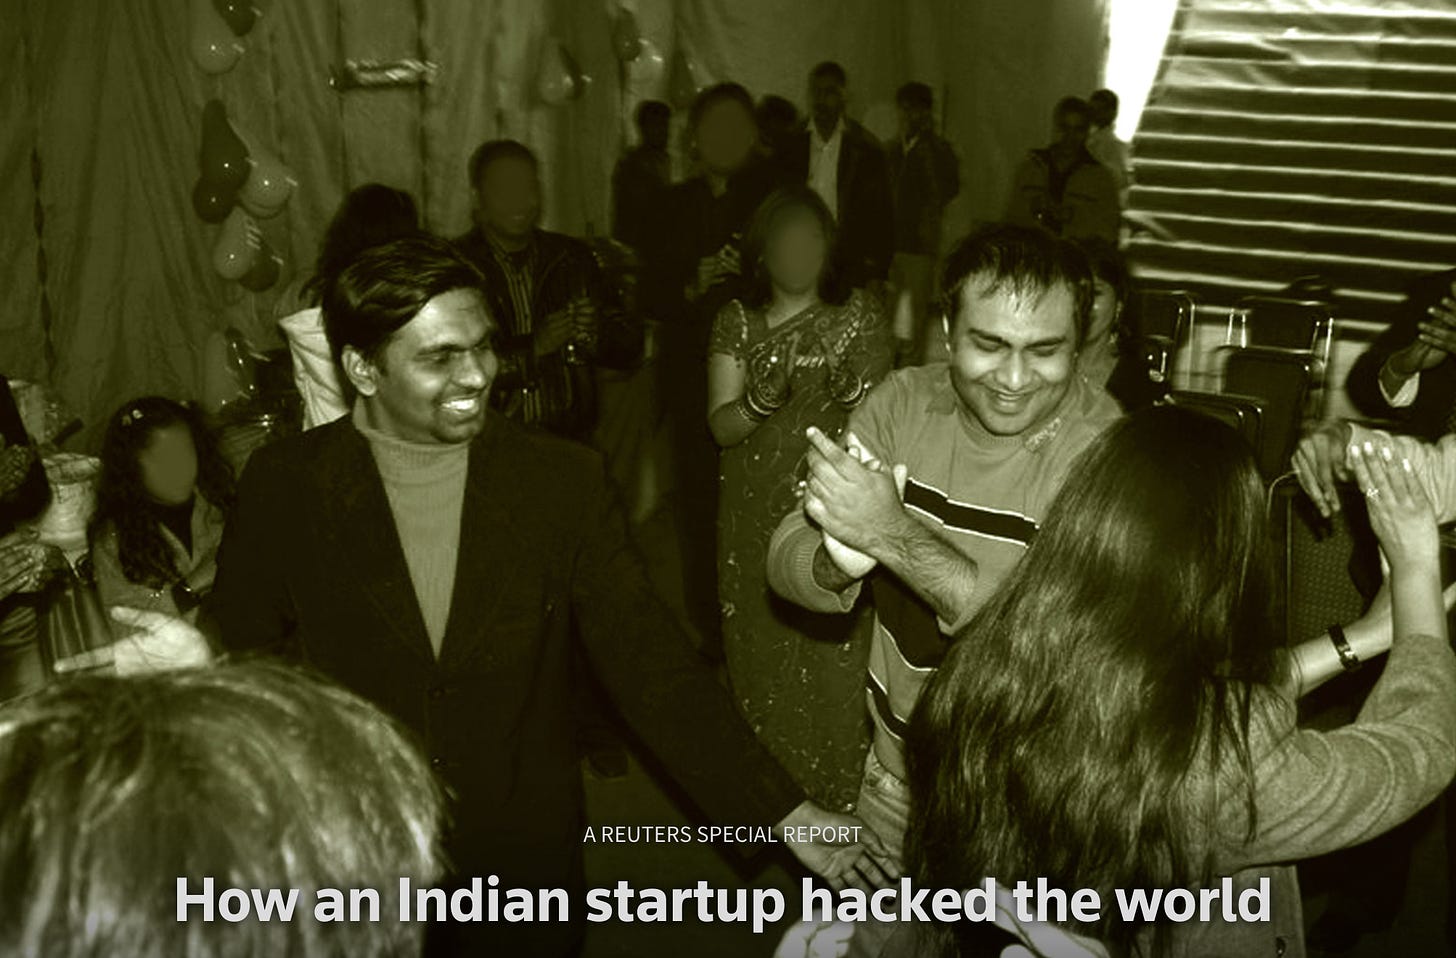 Black and white photo of Appin co-directors Anuj Khare and Rajat Khare in New Delhi at a party circa 2007. Both men are smiling and dancing in a group setting, Anuj dressed in a blazer and turtle neck and Rajat wearing a striped sweatshirt and jeans.